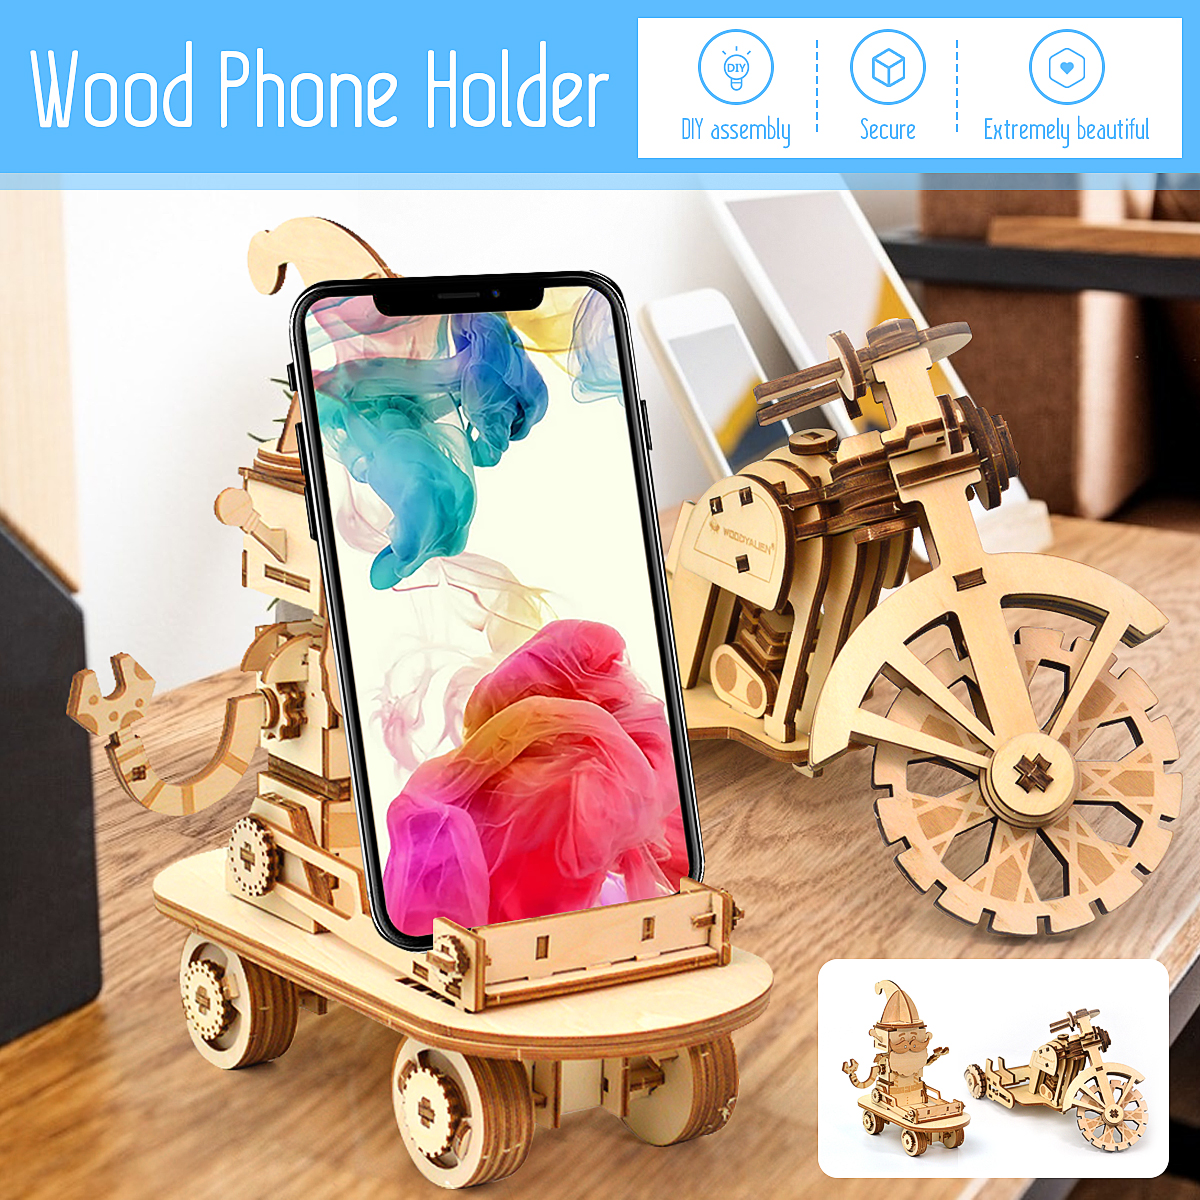 Newest-DIY-3D-Wooden-Puzzle-Assembly-Toy-Gift-for-Children-Adult-Phone-Holder-Phone-Stand-1684901-1